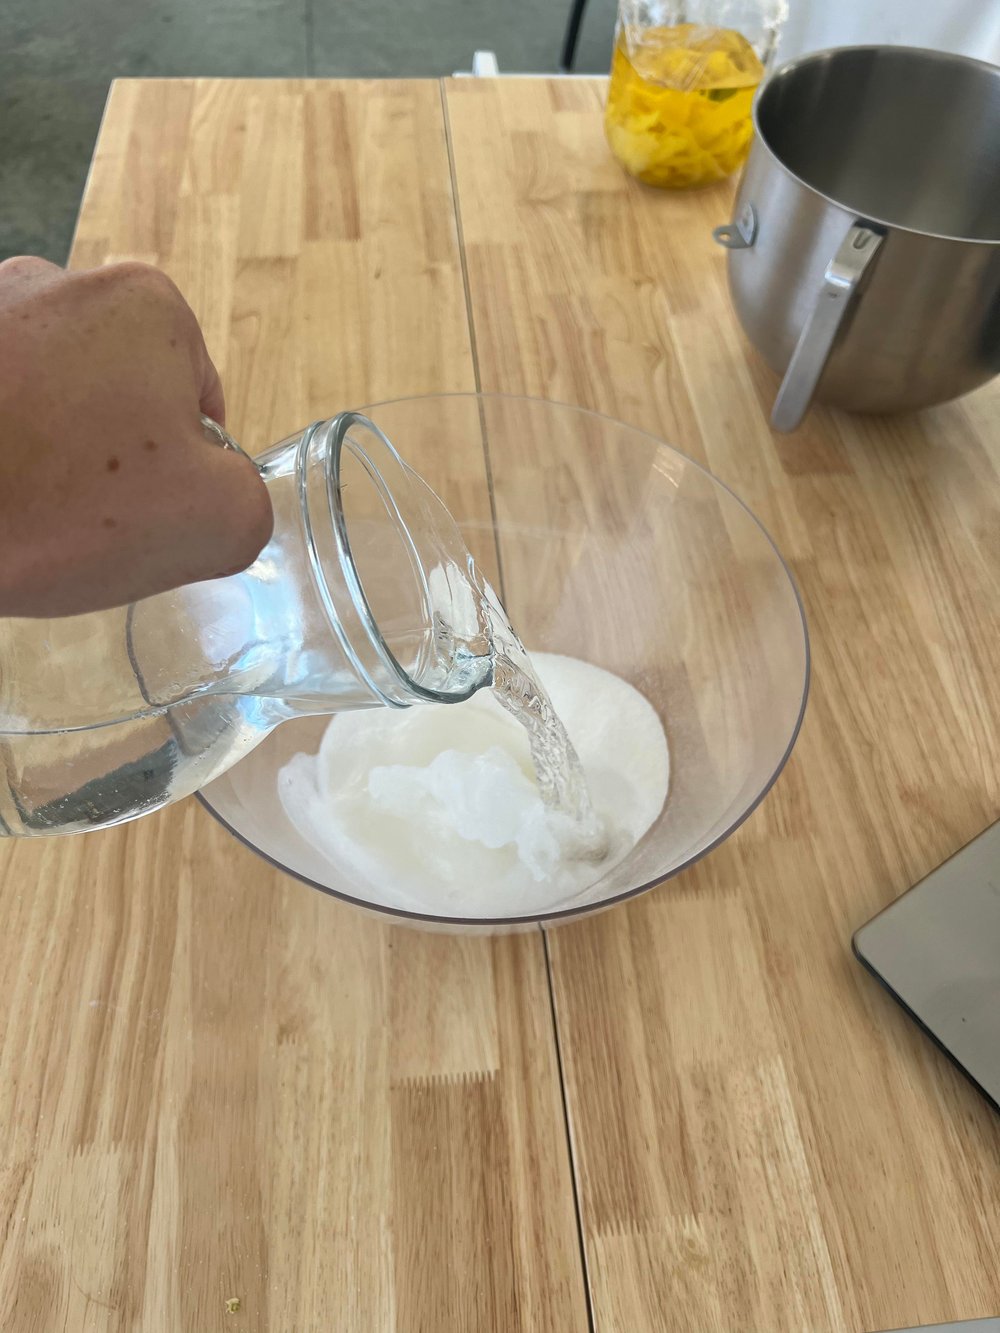 Combine 1 litre of water with the sugar